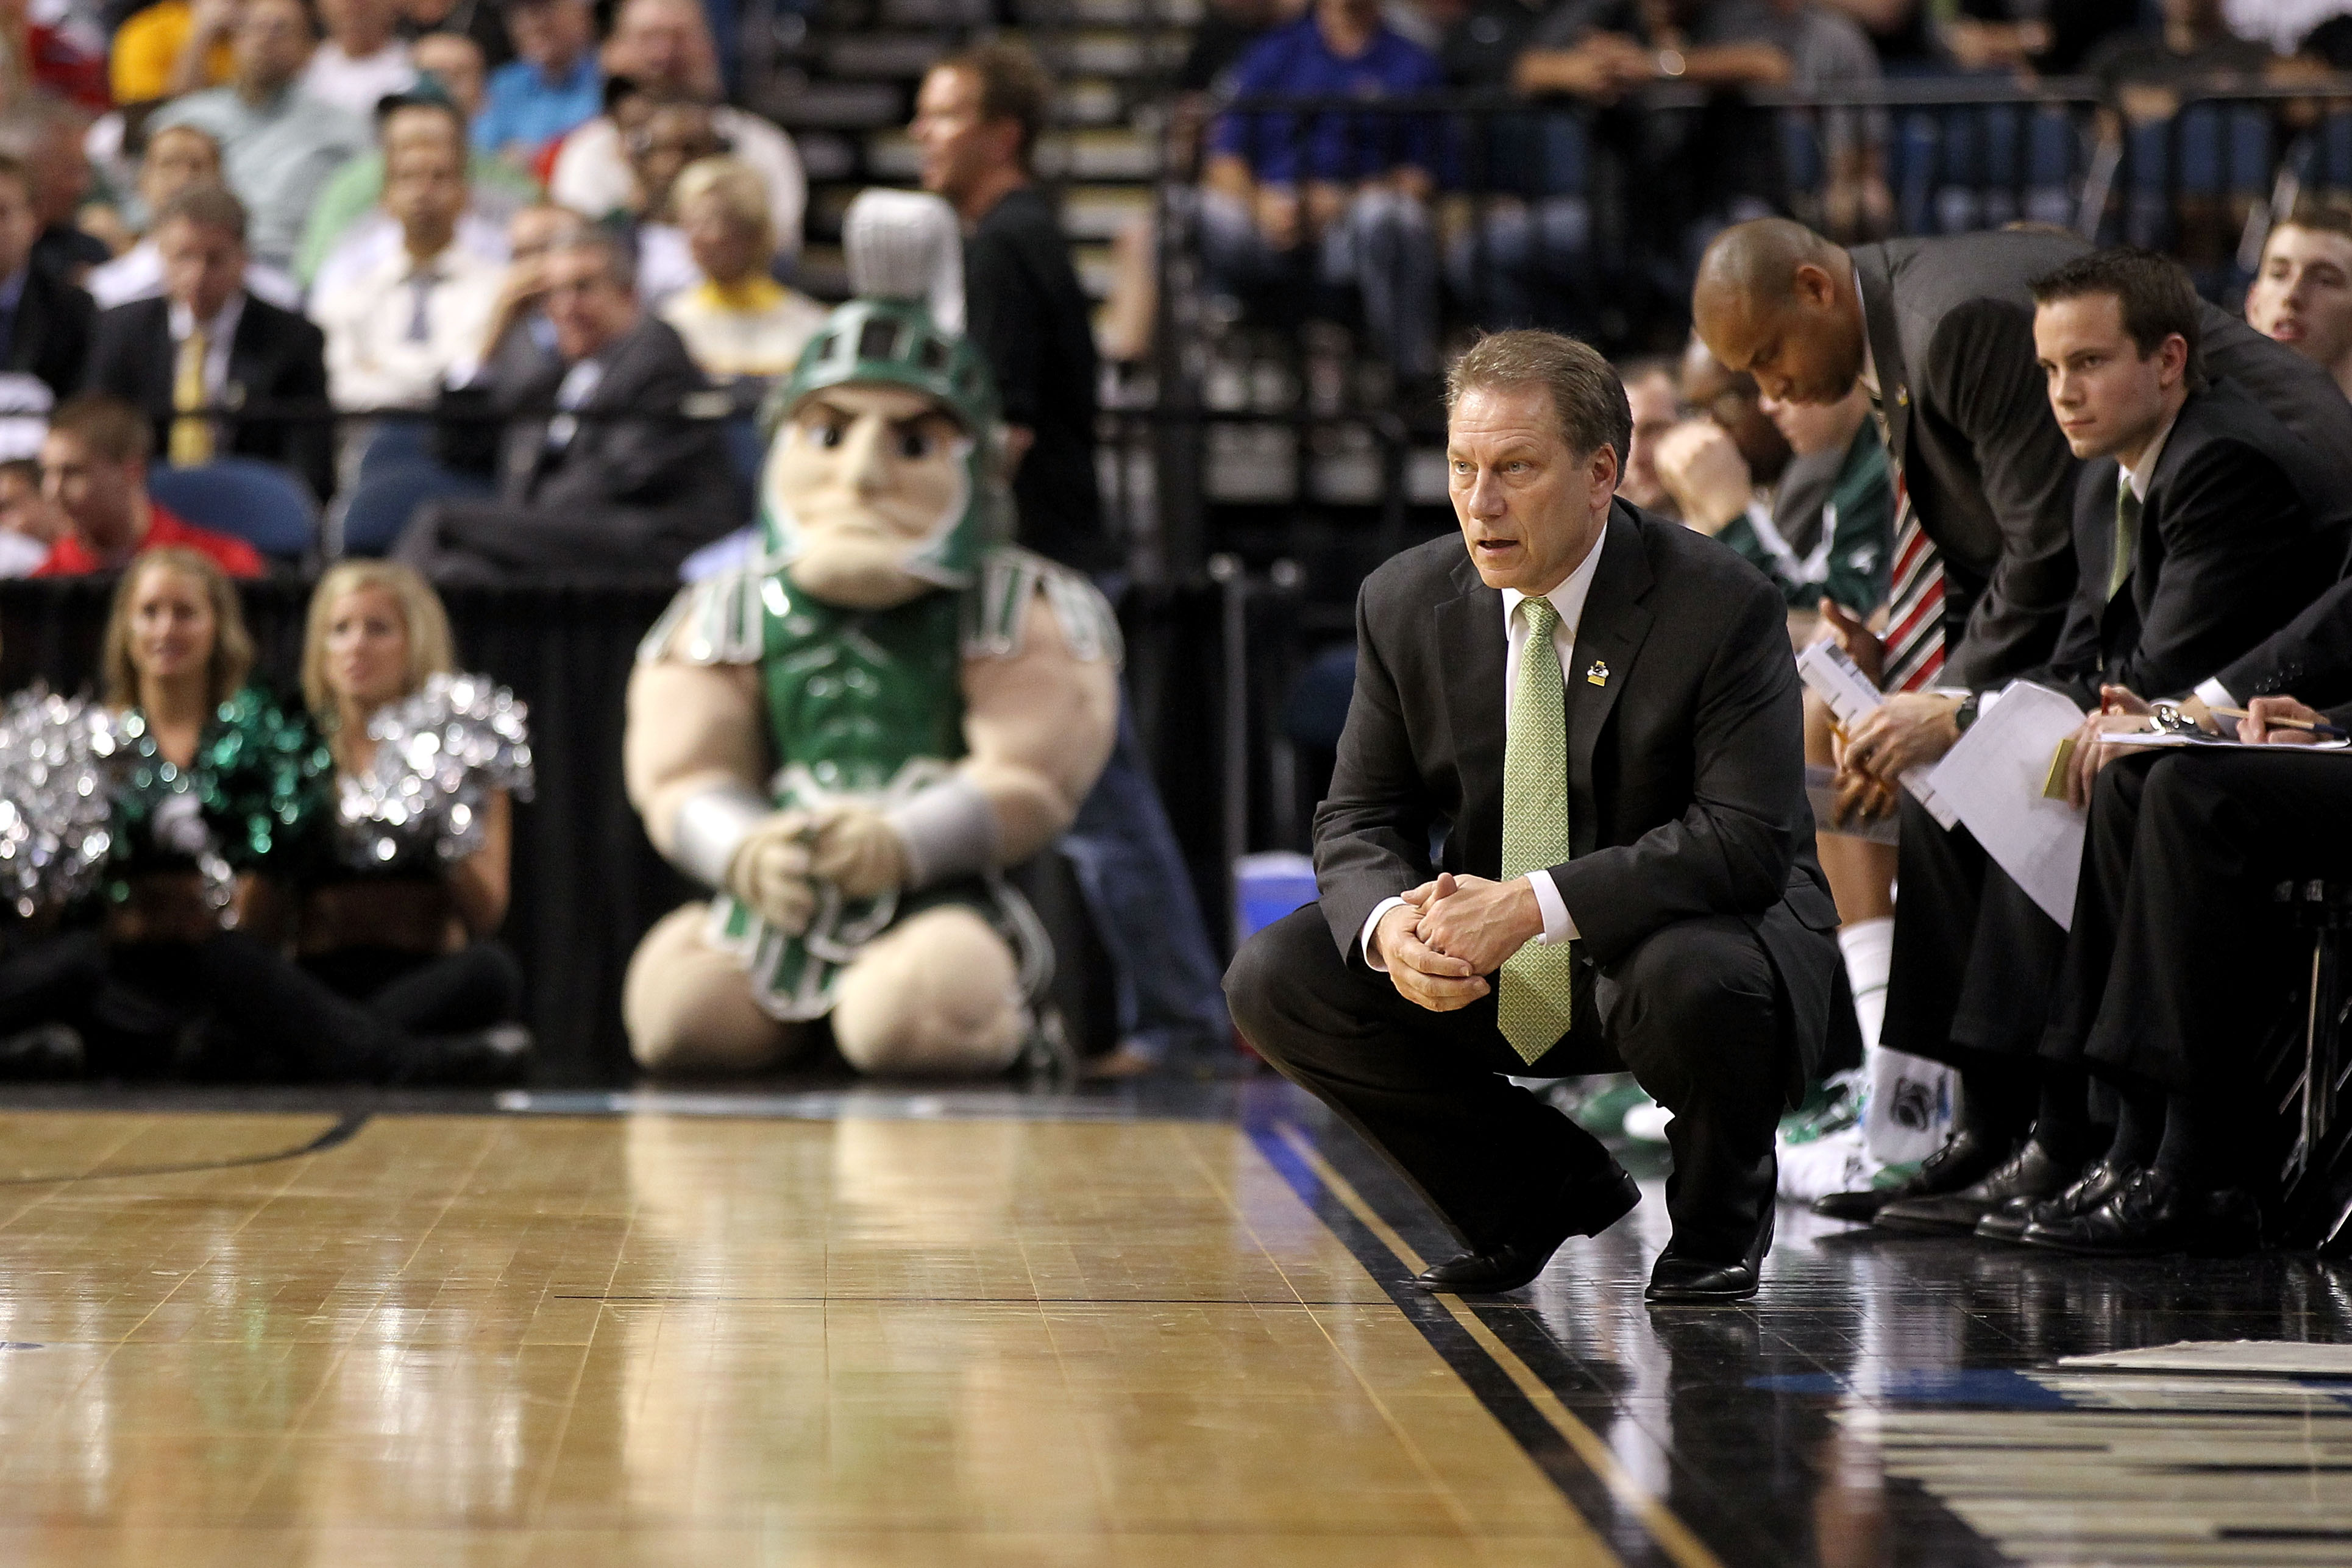 TAMPA, FL - MARCH 17:  Head coach Tom Izzo of the Michigan State Spartans looks on against the UCLA Bruins during the second round of the 2011 NCAA men's basketball tournament at St. Pete Times Forum on March 17, 2011 in Tampa, Florida. UCLA won 78-76.  (